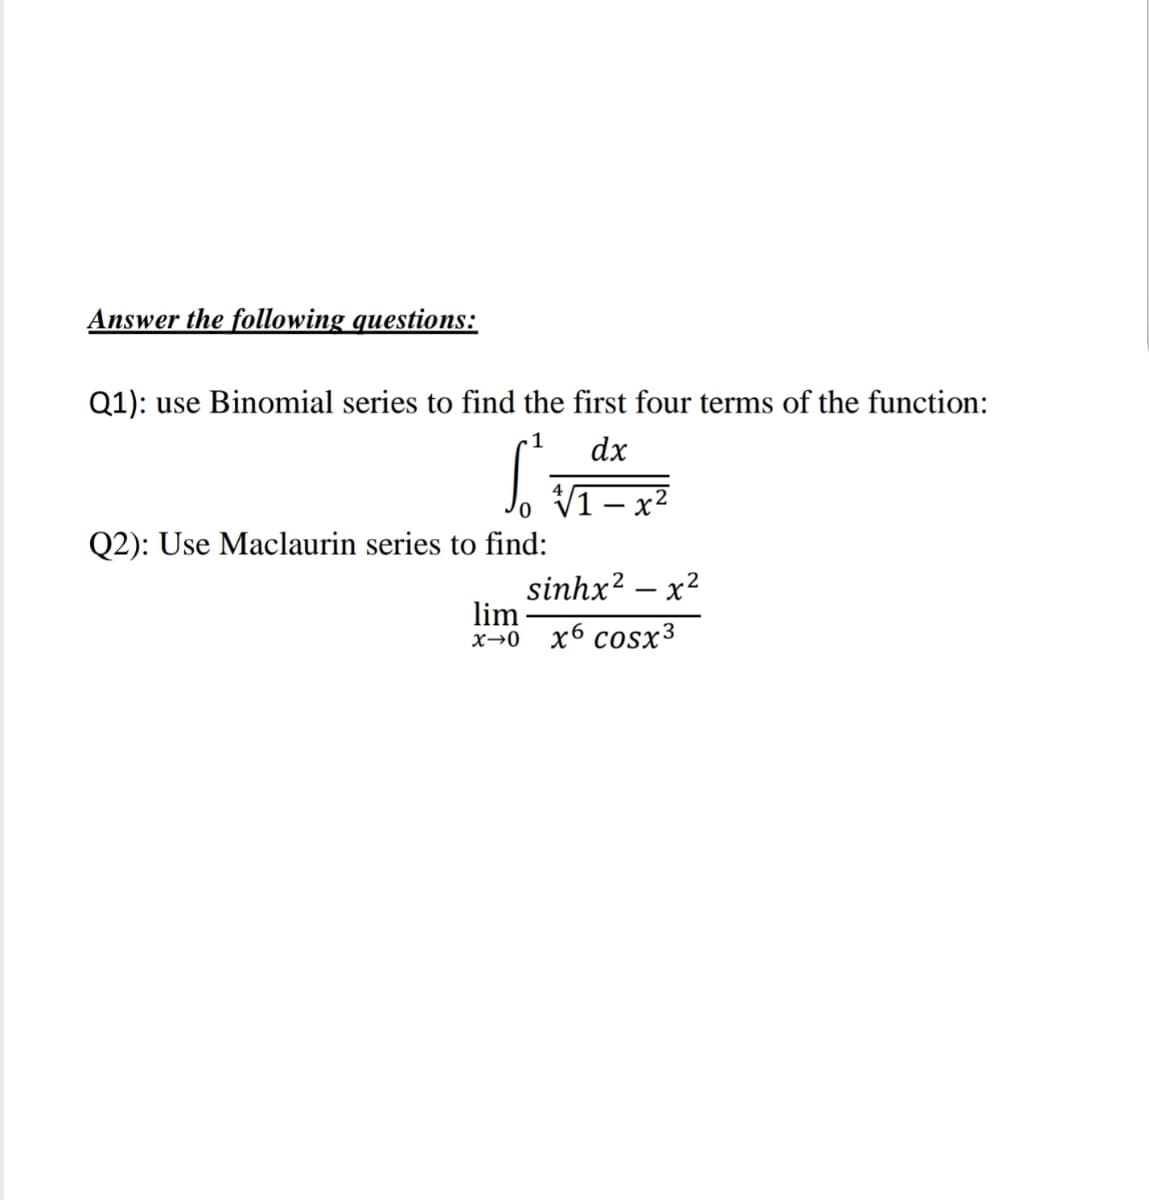 Answer the following questions:
Q1): use Binomial series to find the first four terms of the function:
1
dx
x2
Q2): Use Maclaurin series to find:
sinhx? – x?
lim
х-0 х6 сosx3
